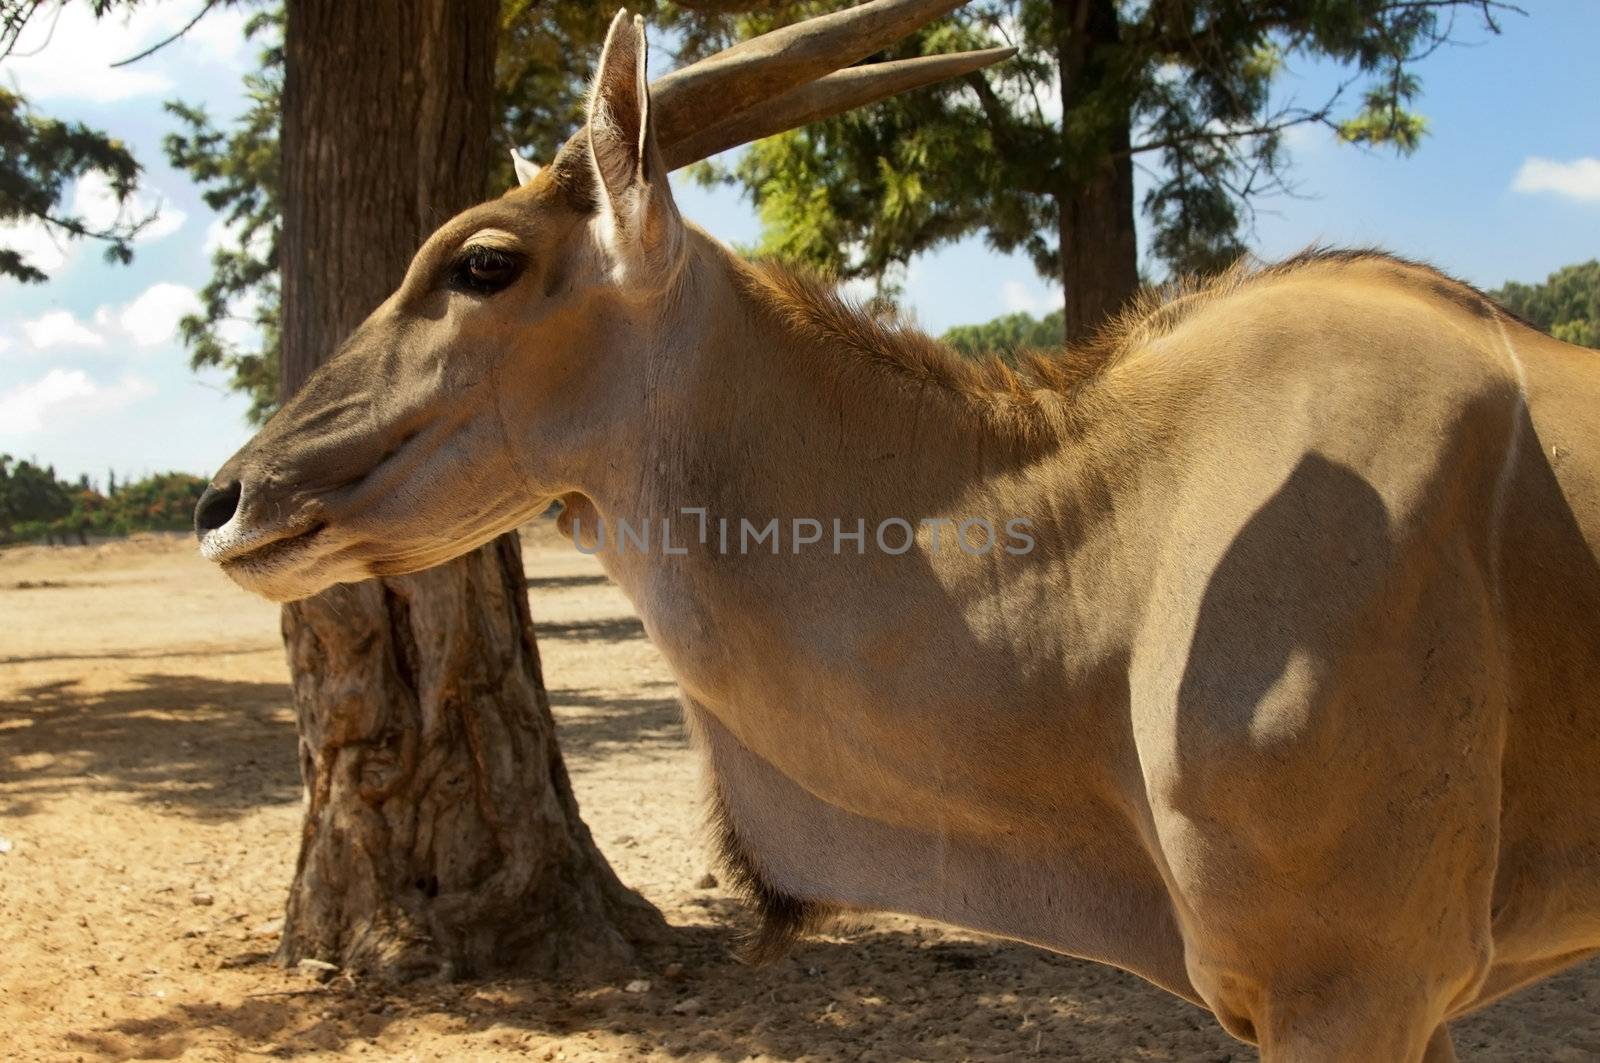 Eland antelope , also known as Kanna it is the world's biggest antelope.